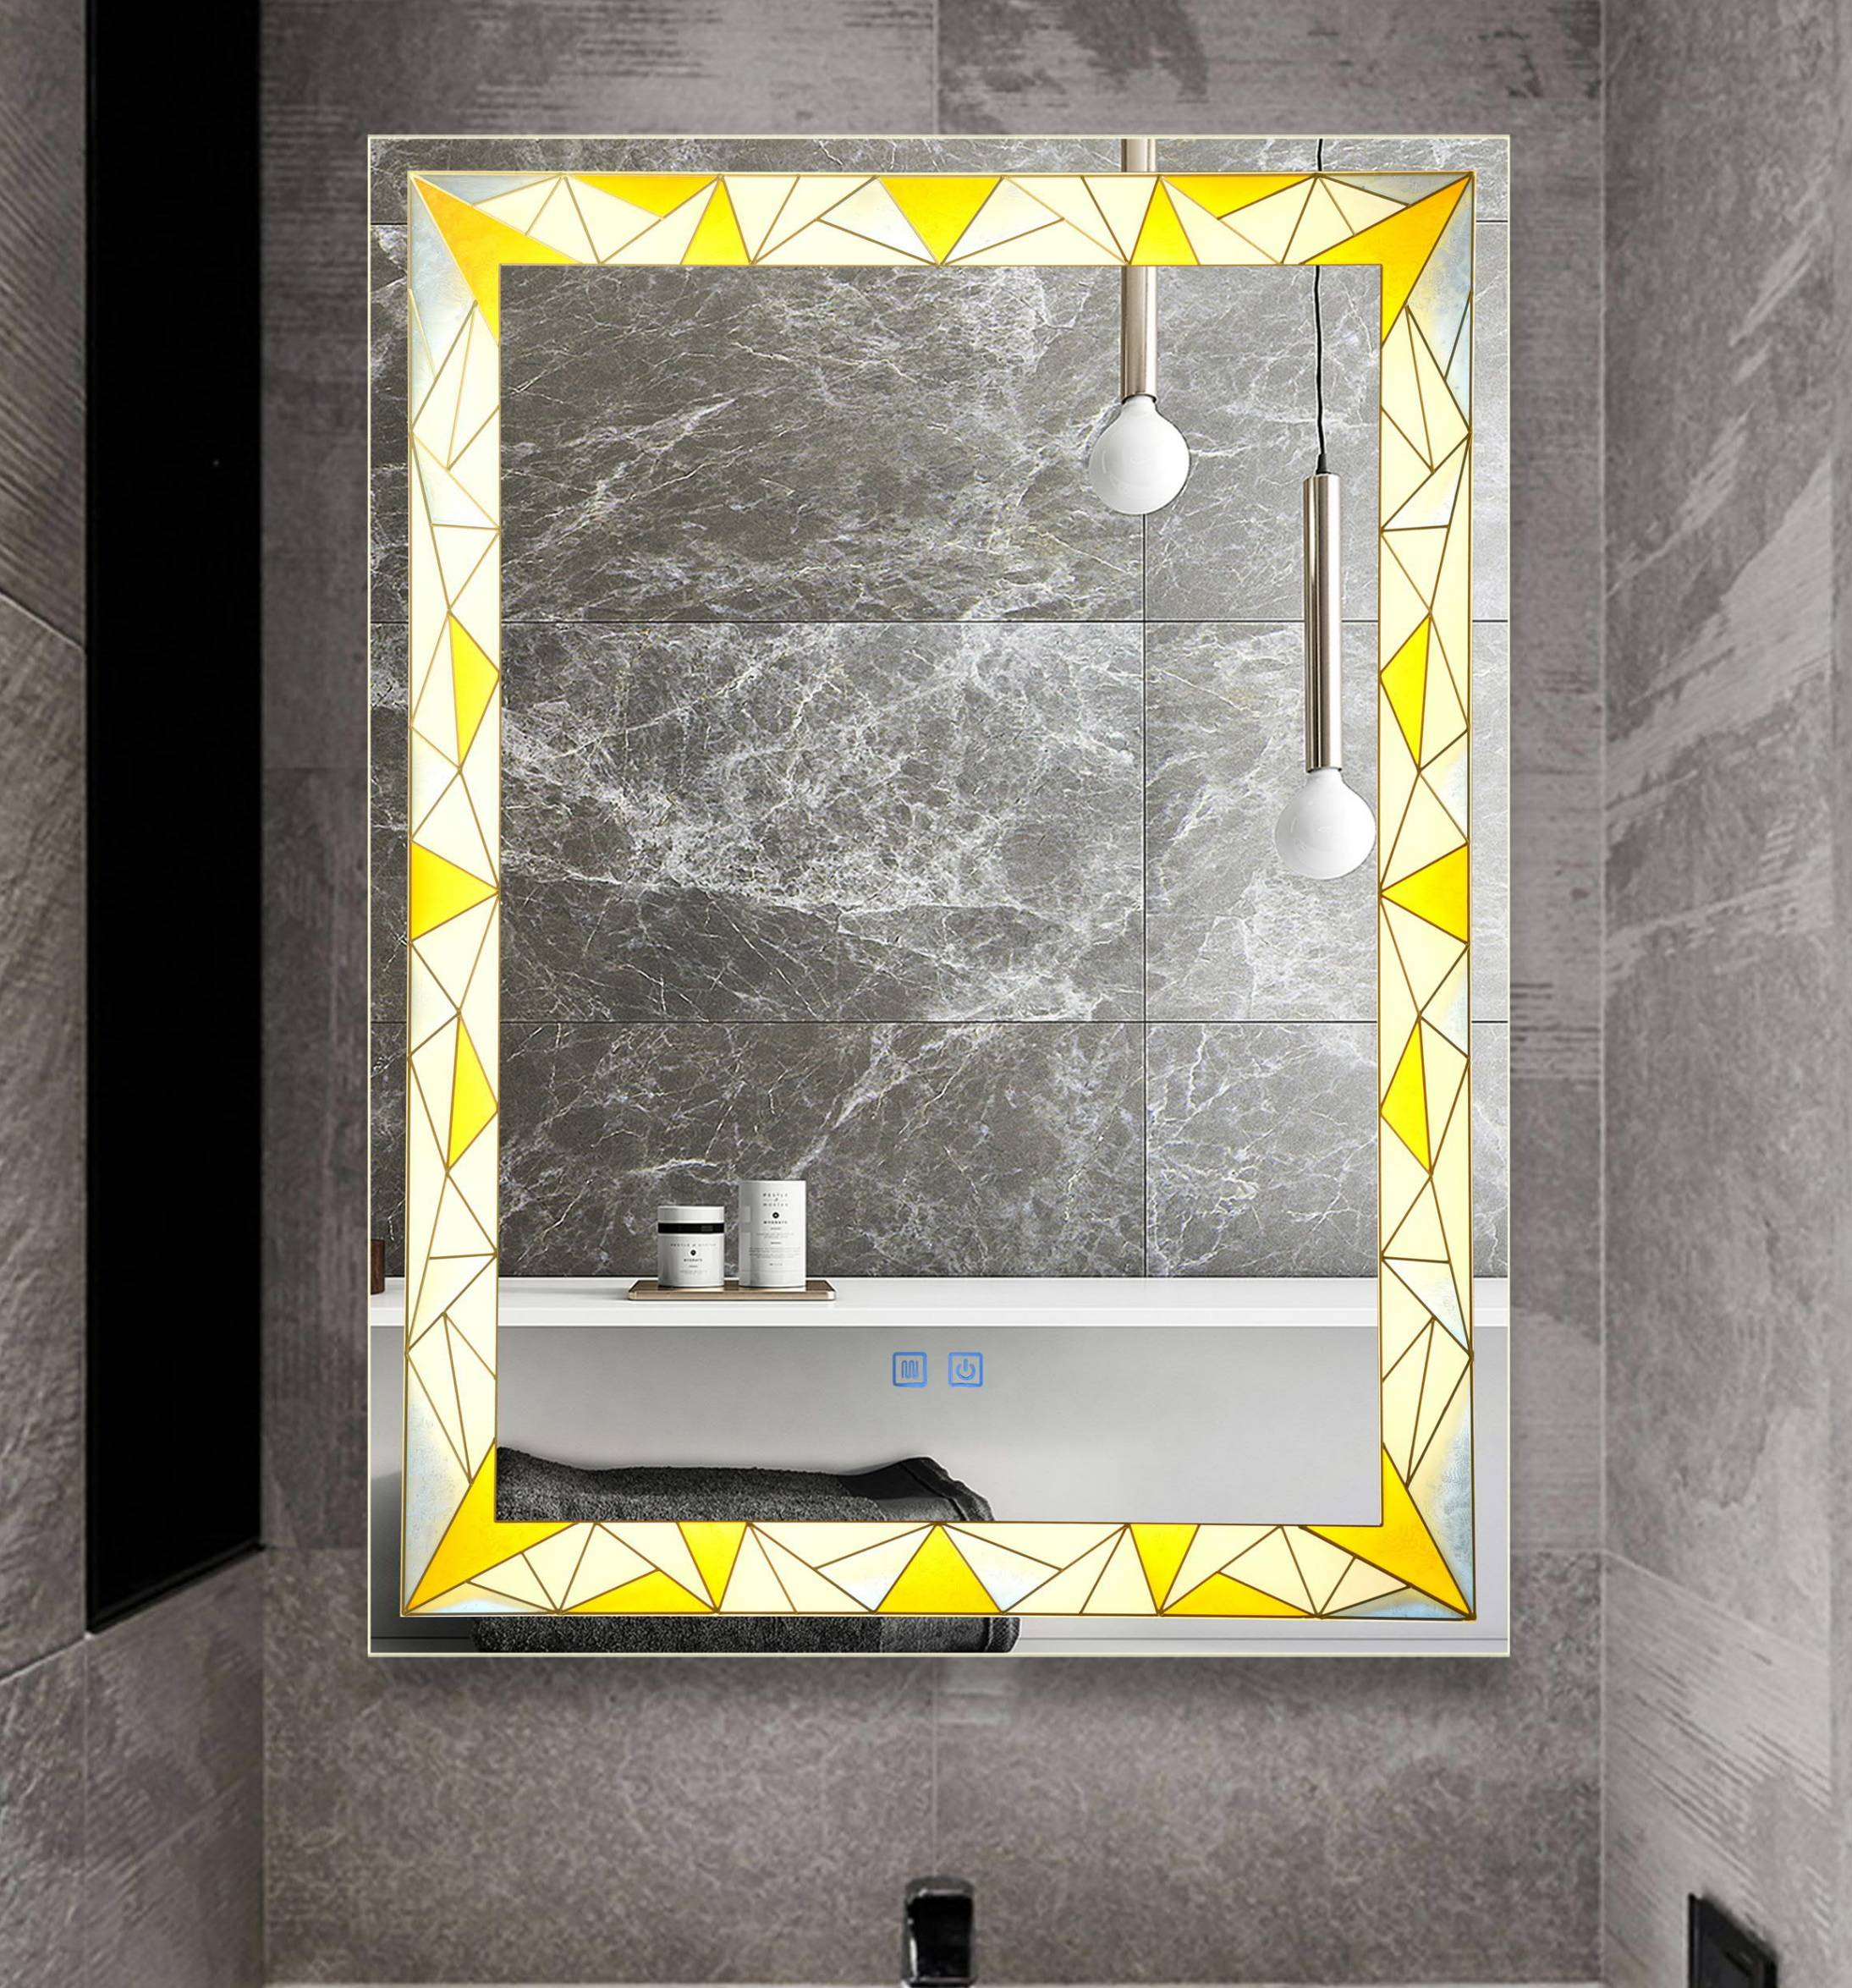 ZHUOTAI LED Bathroom Mirror, Lighted Mirror for Bathroom Wall, Backlit and Front lit, Dimmable, Anti-Fog, Shatterpoof, Memory (Horizontal/Vertical)